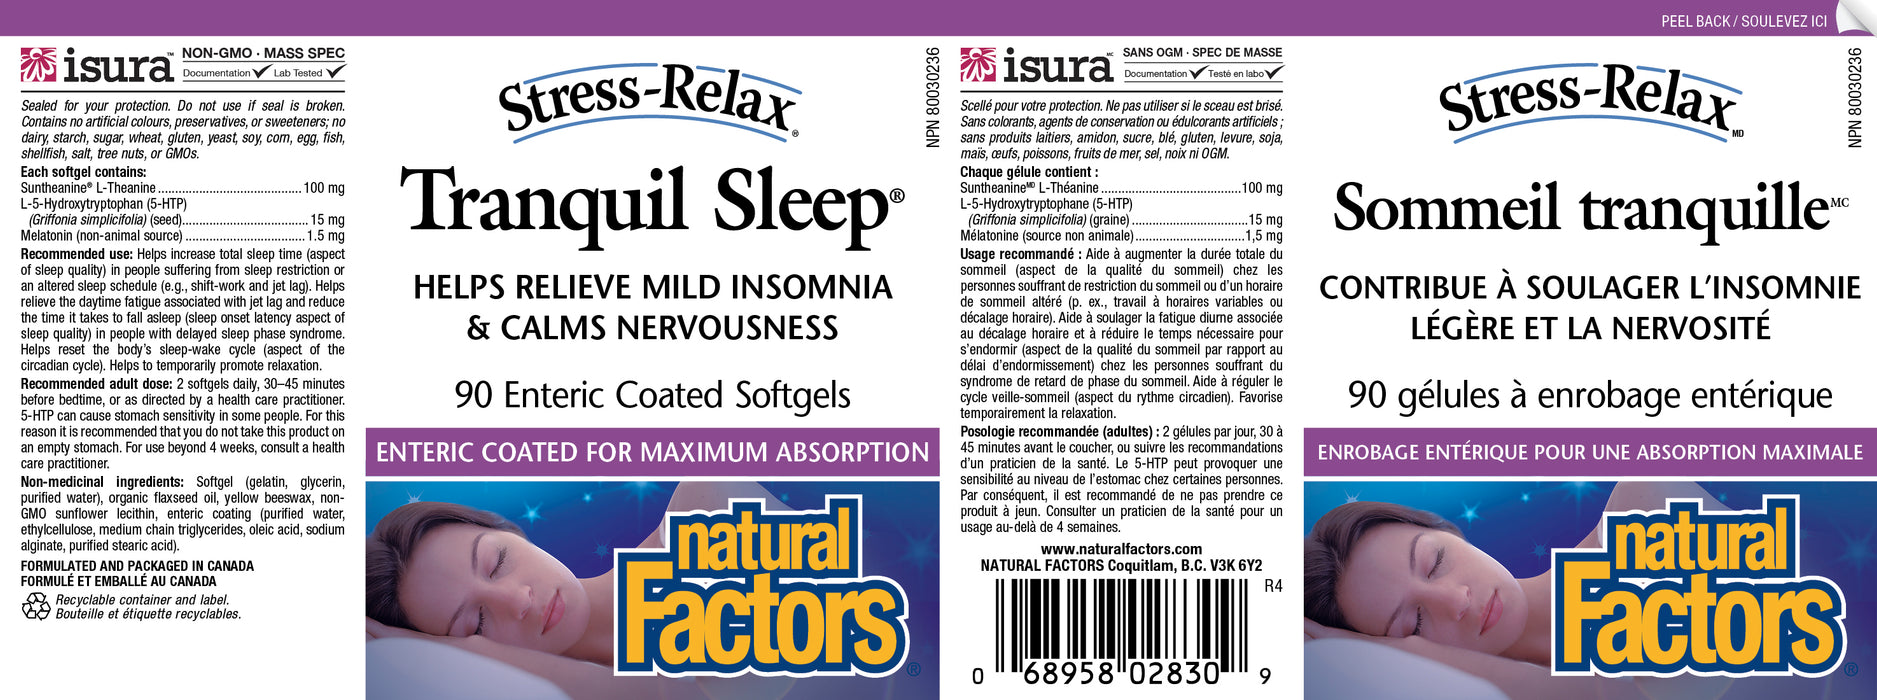 Natural Factors Stress-Relax Tranquil Sleep 90 Enteric Coated Softgels